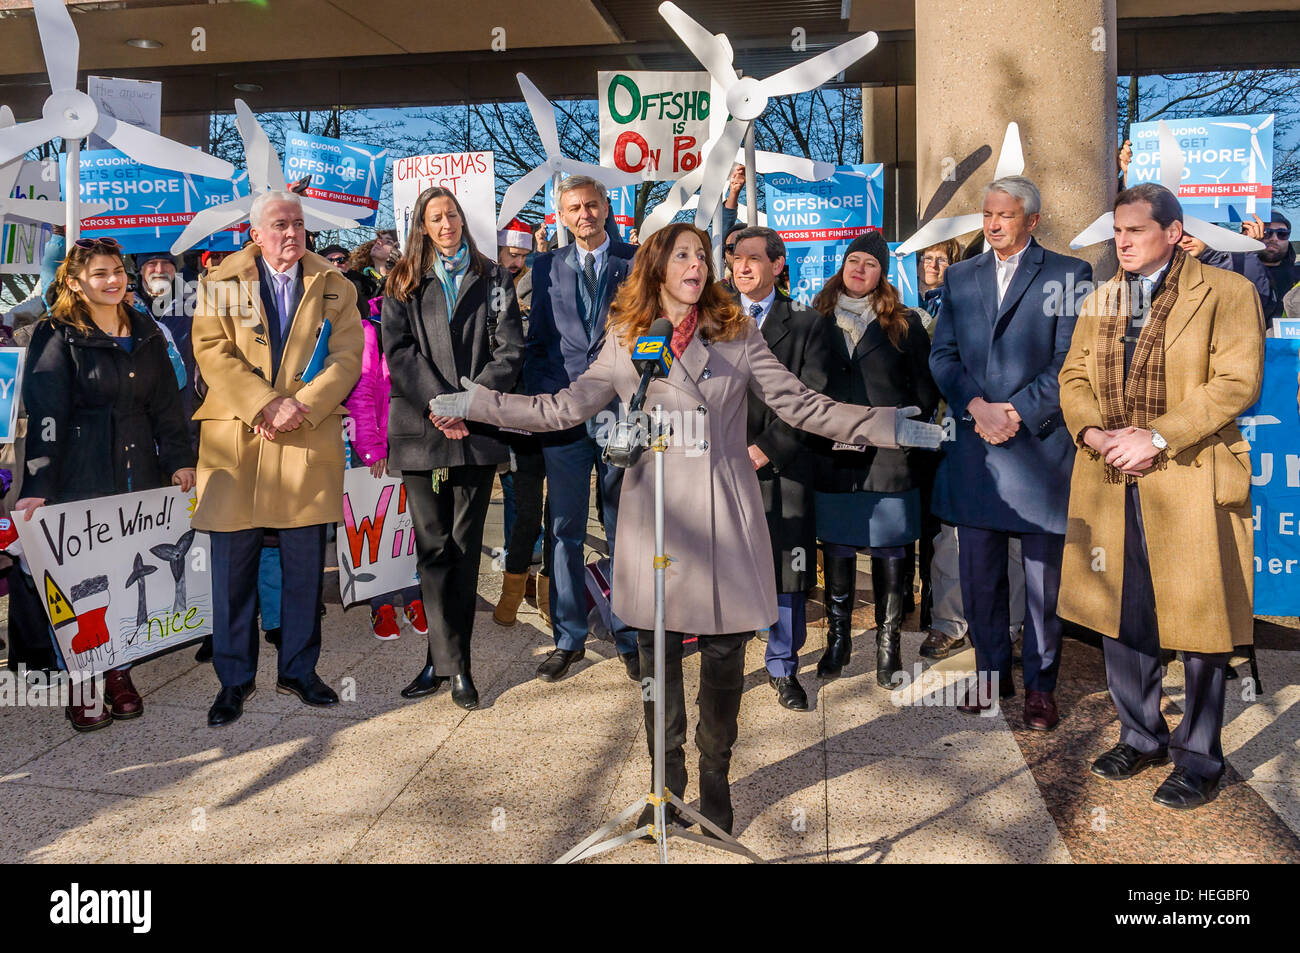 New York, United States. 20th Dec, 2016. On December 20 in Hempstead, NY, as the first offshore wind project in New York gets approval, a huge crowd of elected officials, environmental groups, activists and concerned New Yorkers rally to support Long Island Power Authority (LIPA) and ask for offshore wind commitment in New York - Adrienne Esposito, Executive Director of Citizens Campaign for the Environment said: “It's been a marathon of work and effort to bring wind power to Long Island, but we are at the last mile and moving closer to the finish line” © Erik McGregor/Pacific Press/Alamy Live Stock Photo